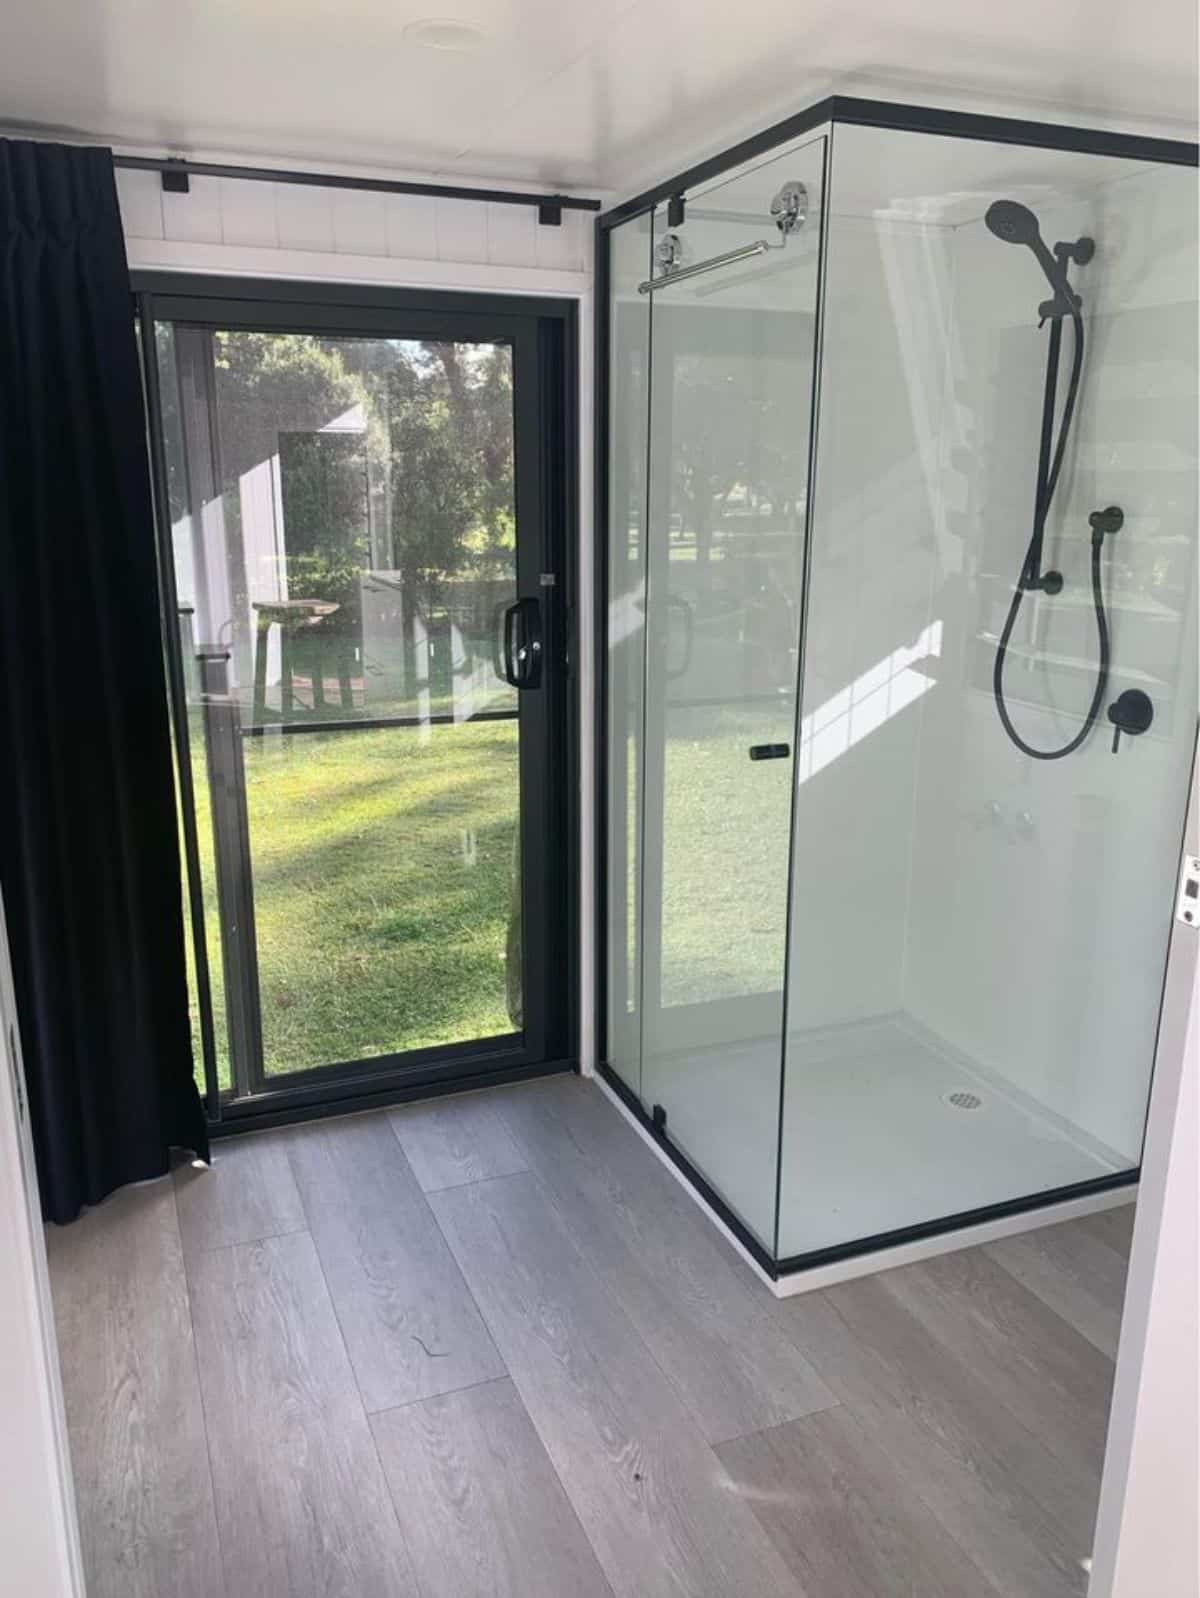 square glass enclosure shower area in bathroom and ample space to walk around